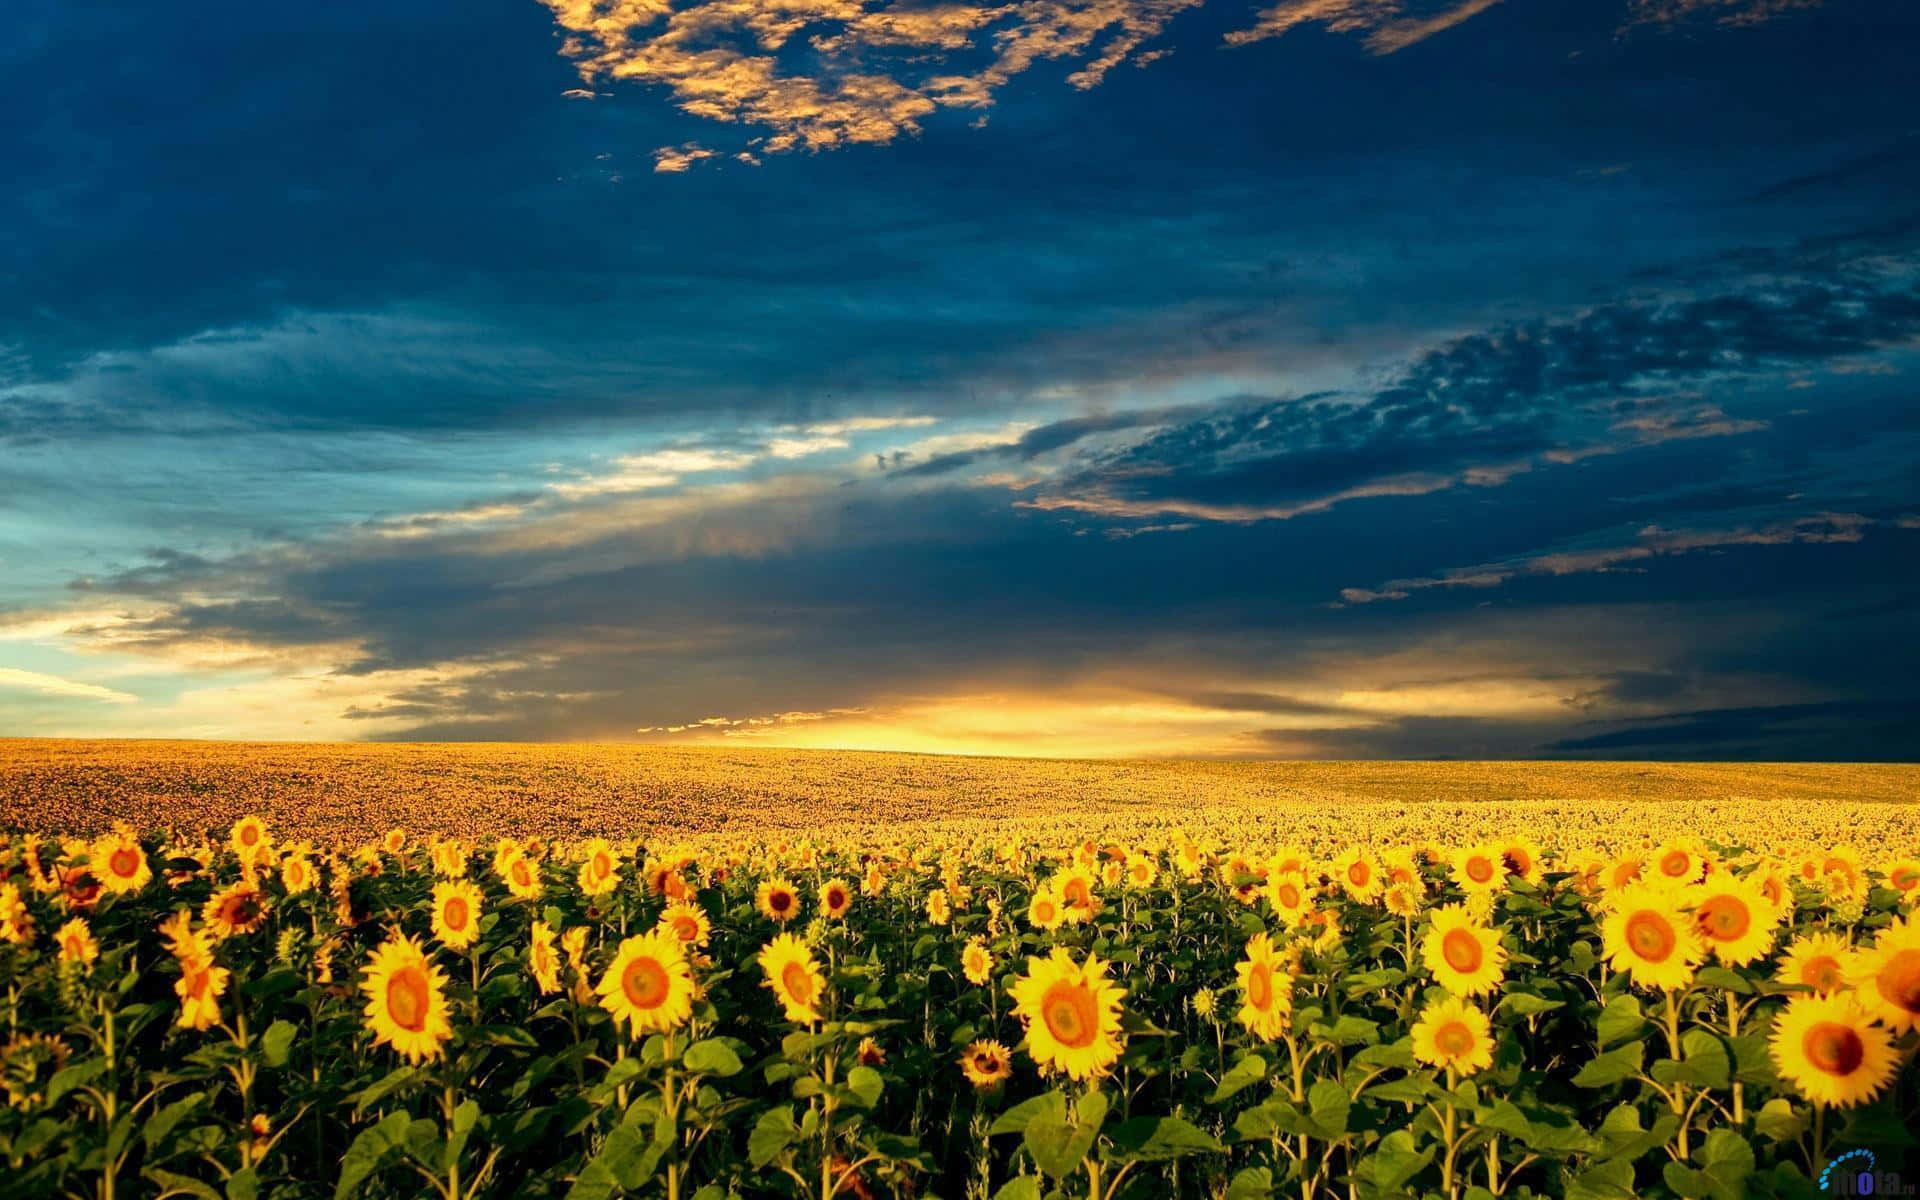 Sunflowers In The Field At Sunset